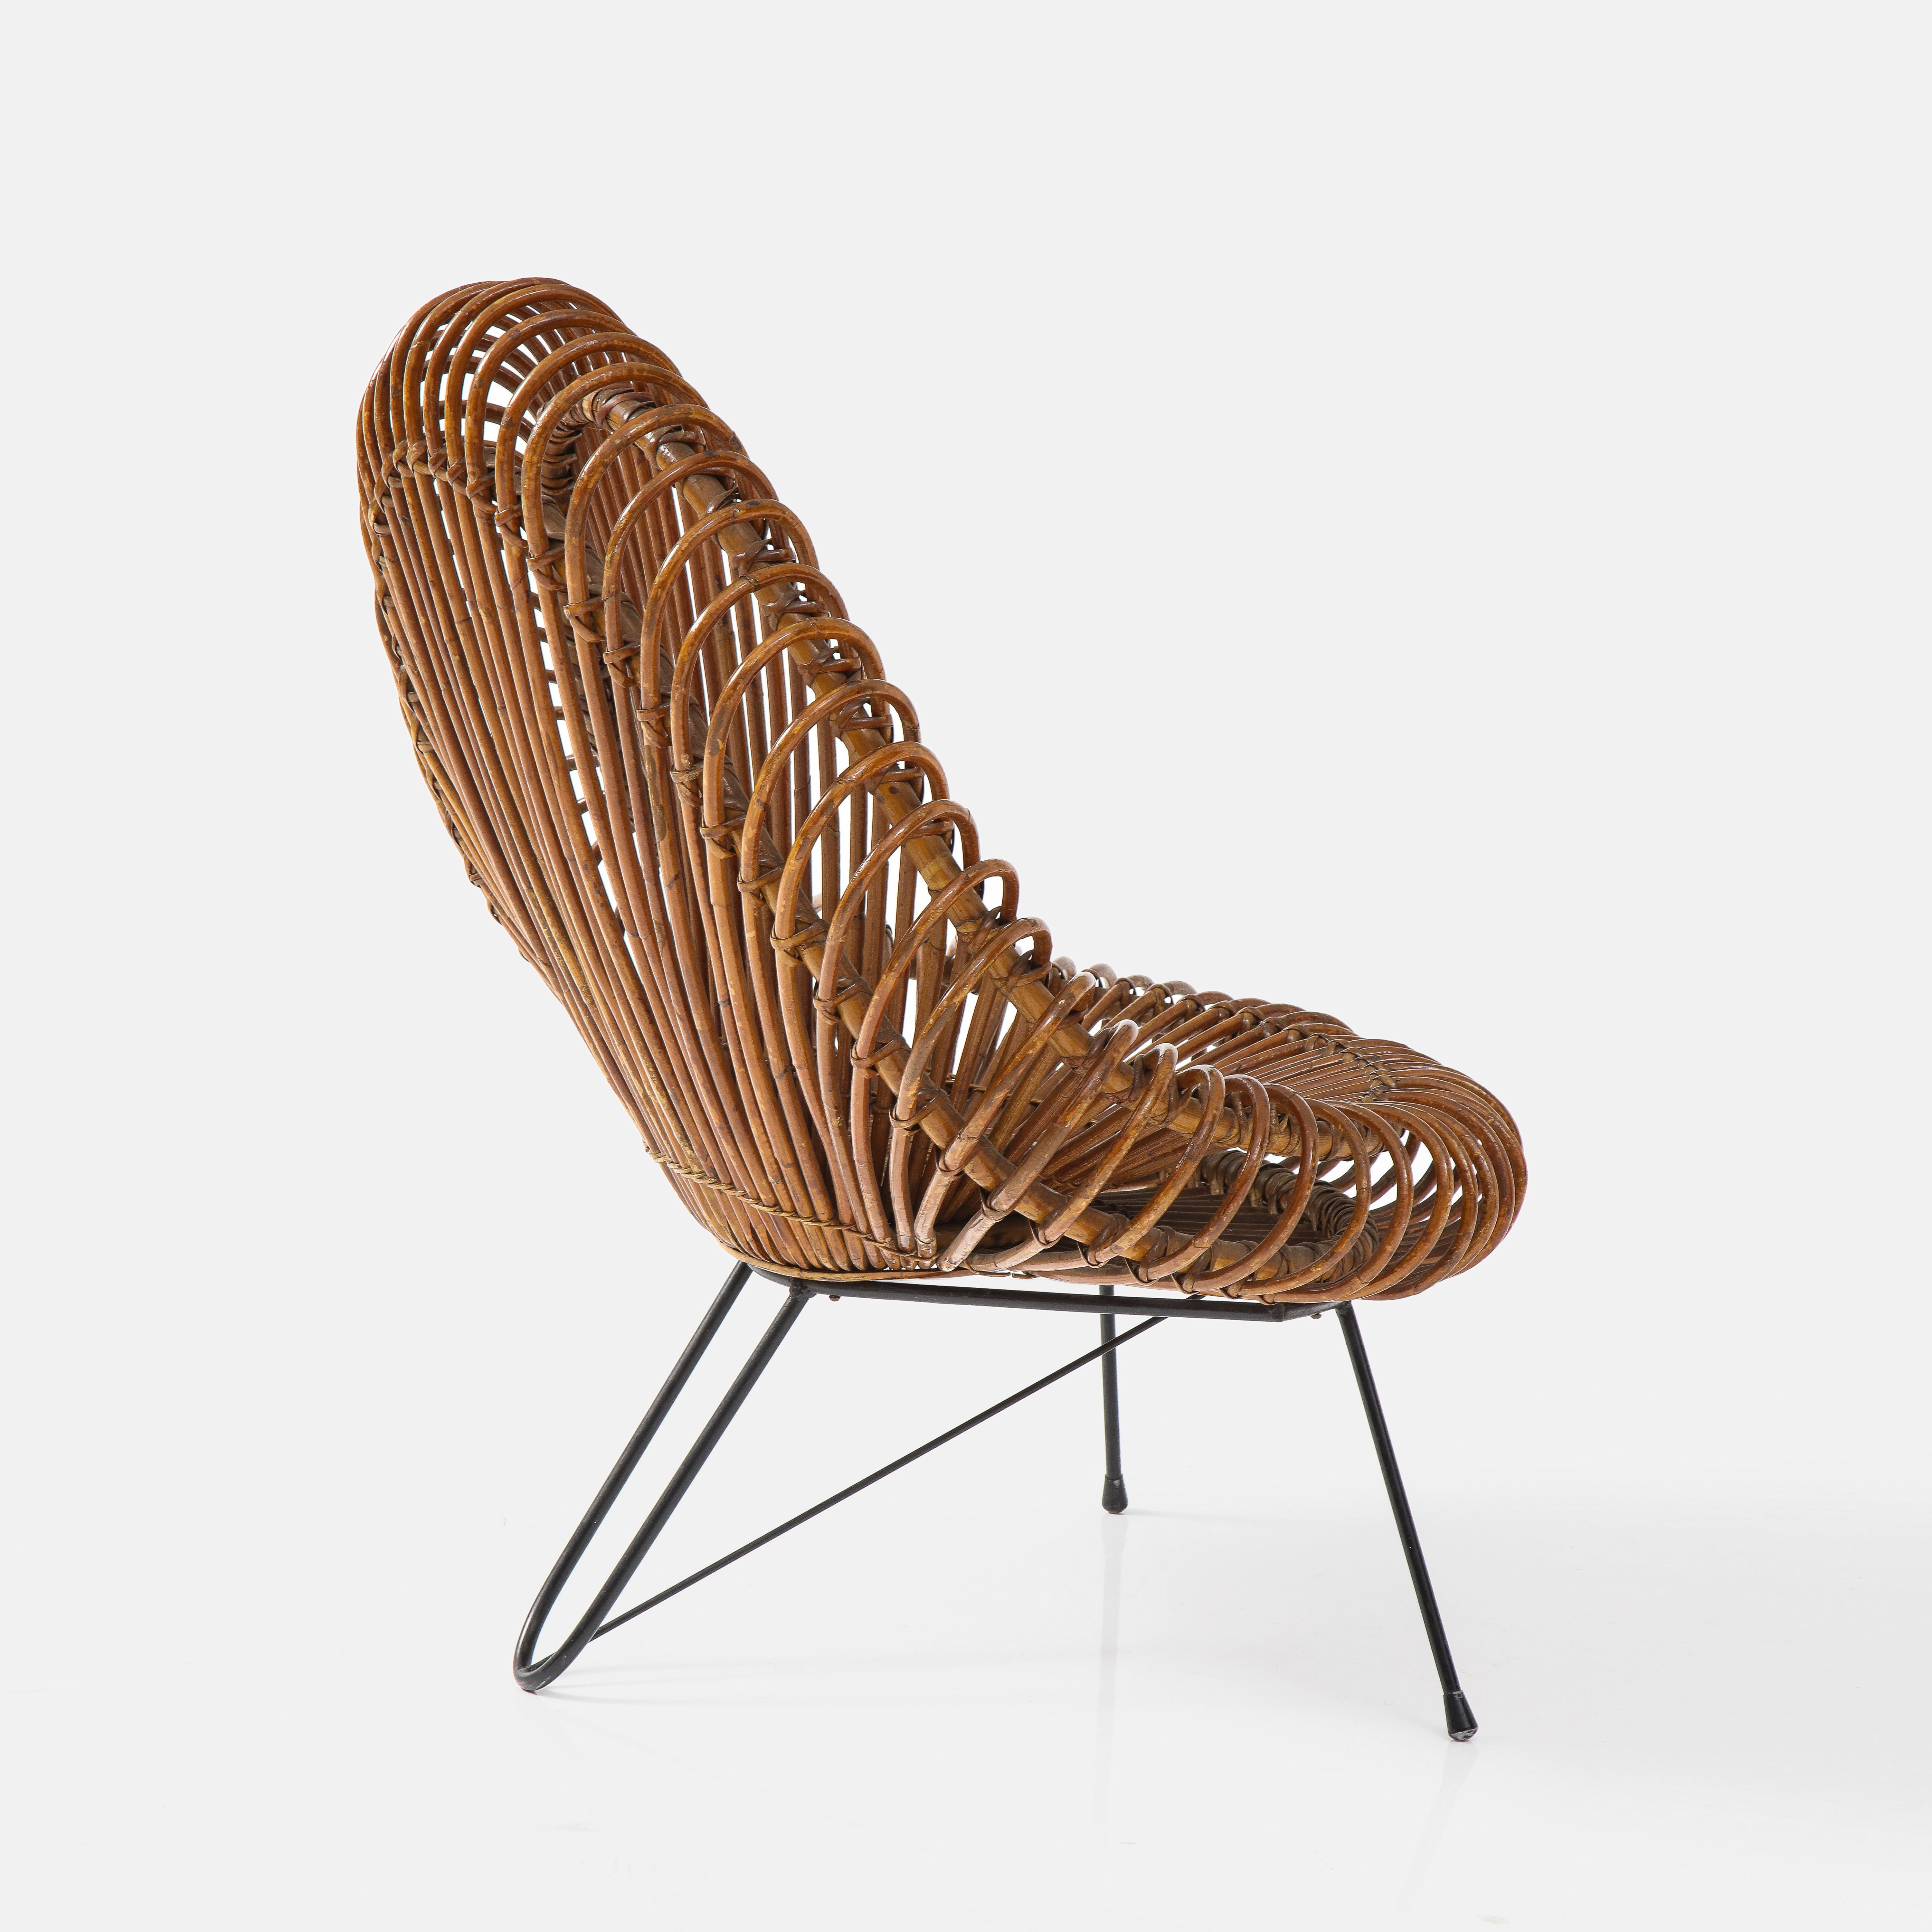 Mid-Century Modern Janine Abraham and Dirk Jan Rol Sculptural Rattan Lounge Chair, France, 1950s For Sale